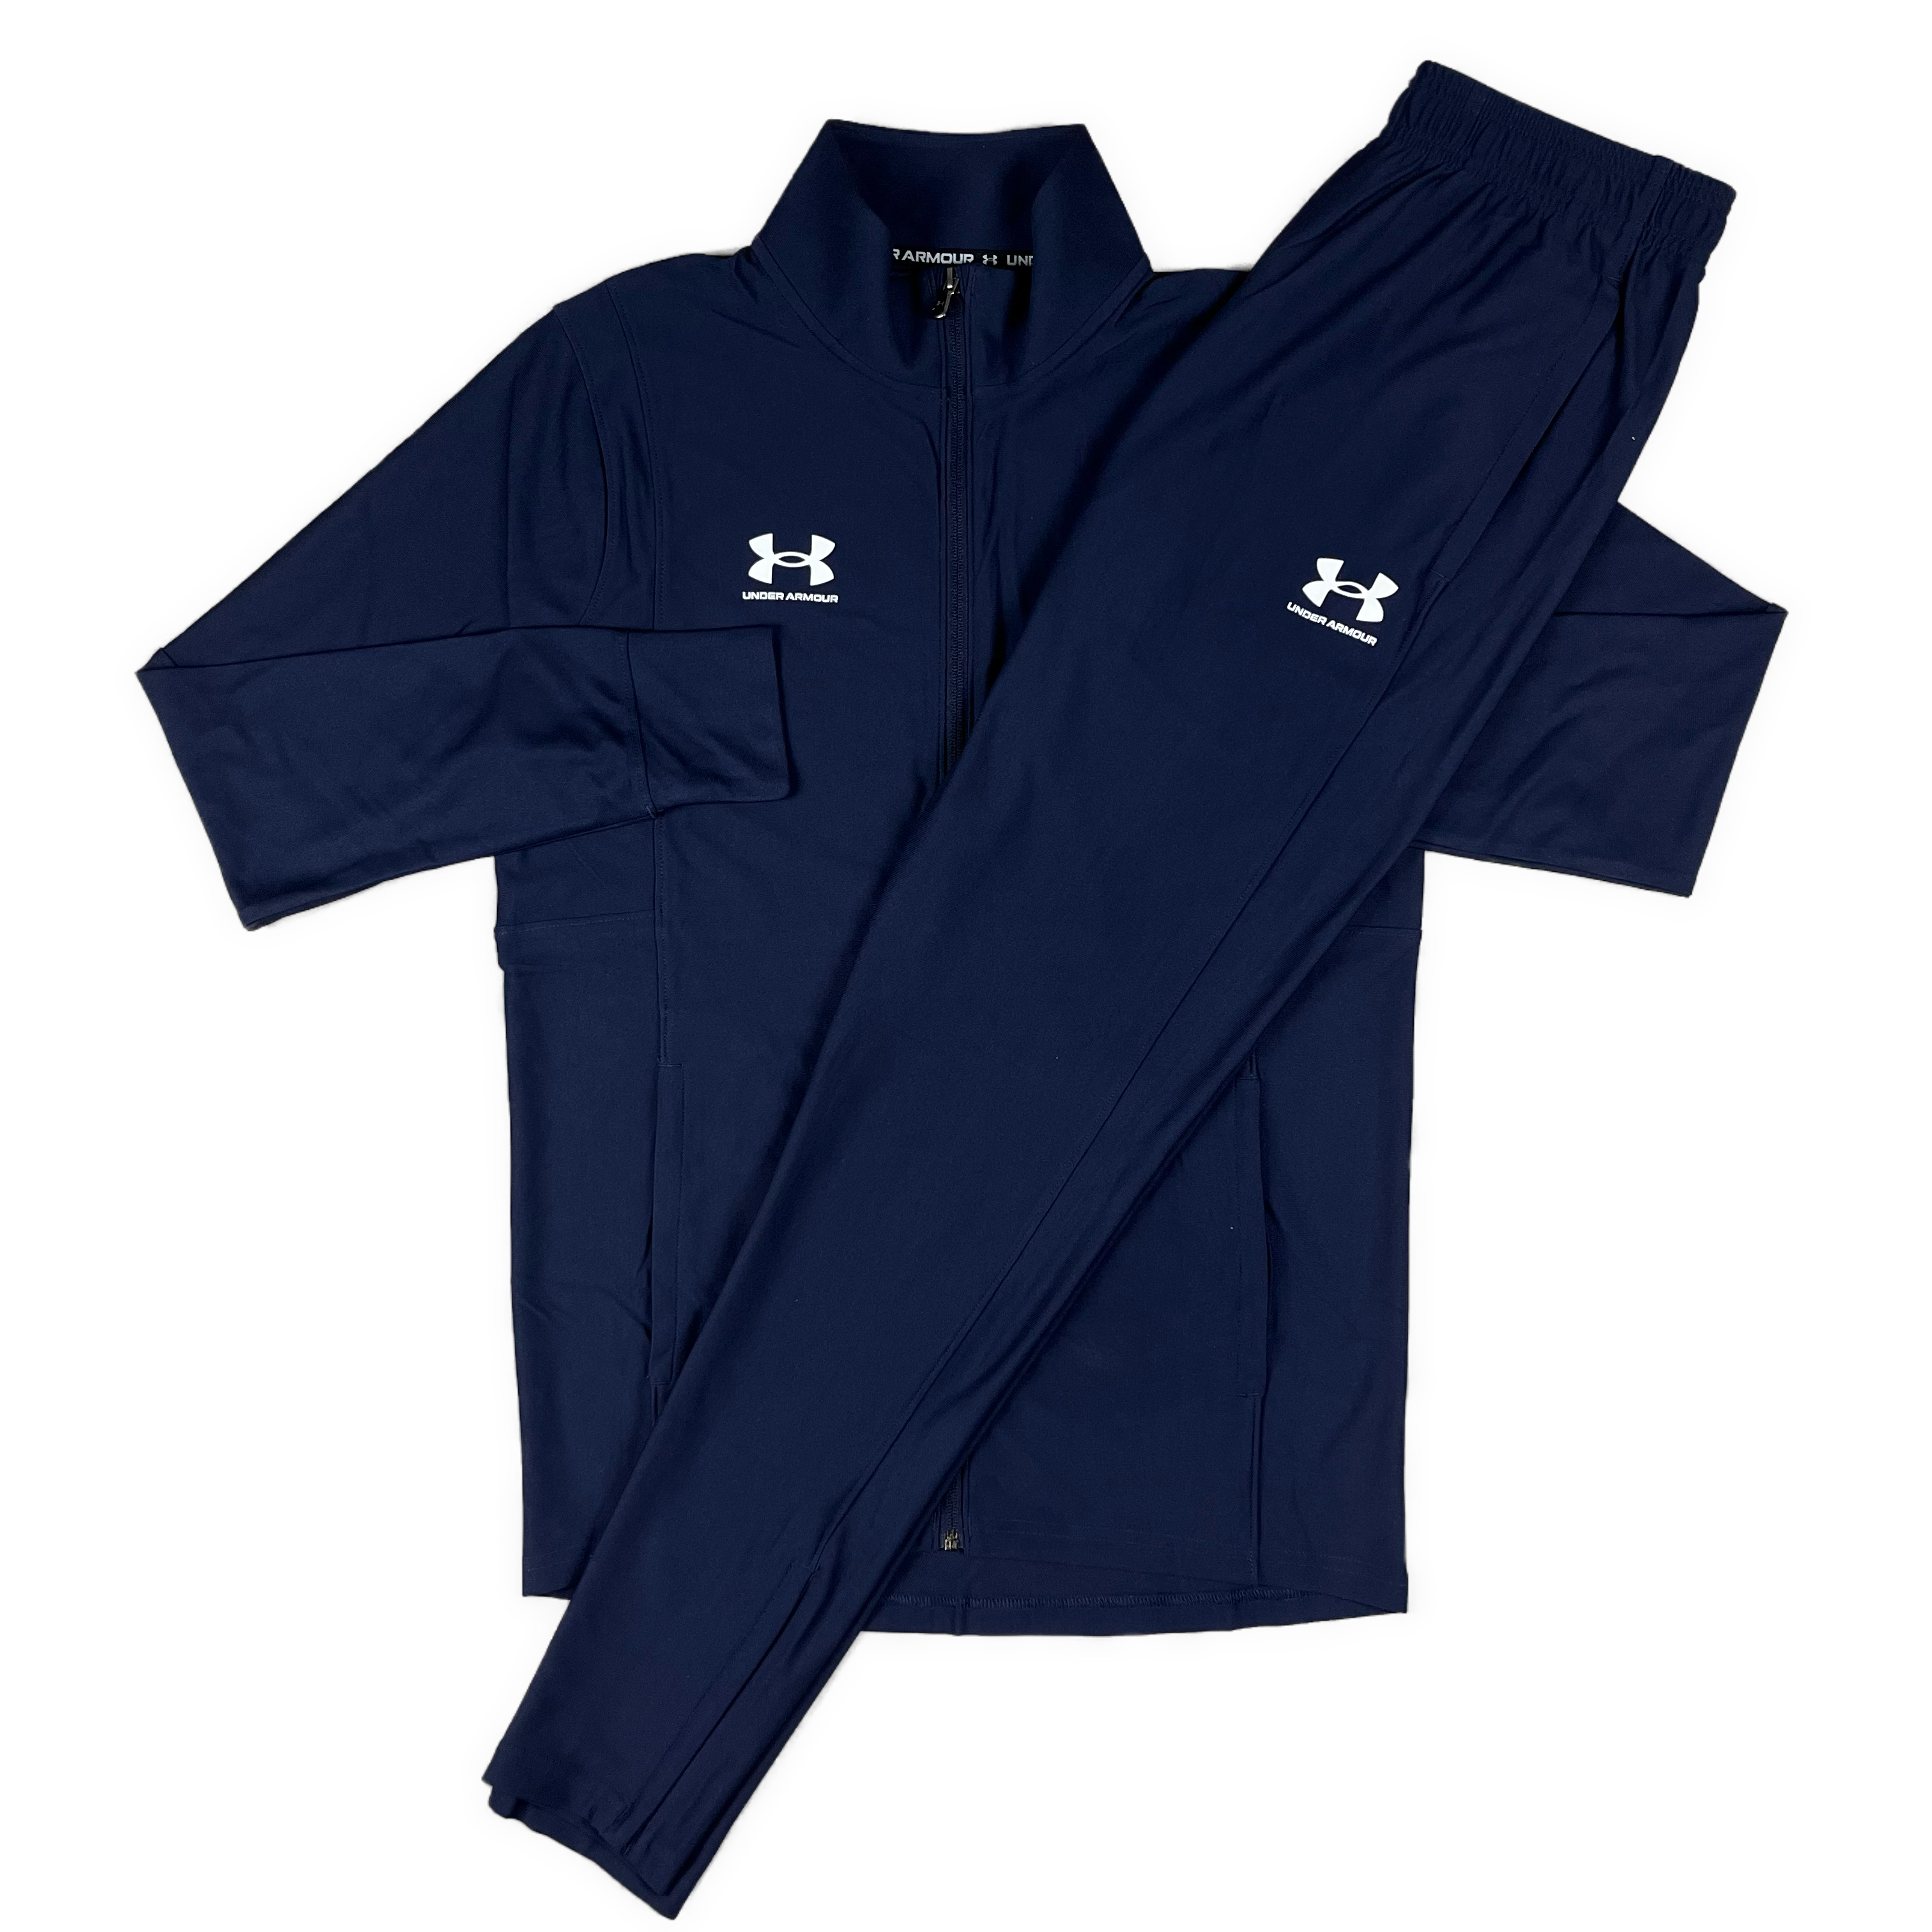 UNDER ARMOUR CHALLENGER TRACKSUIT - NAVY BLUE